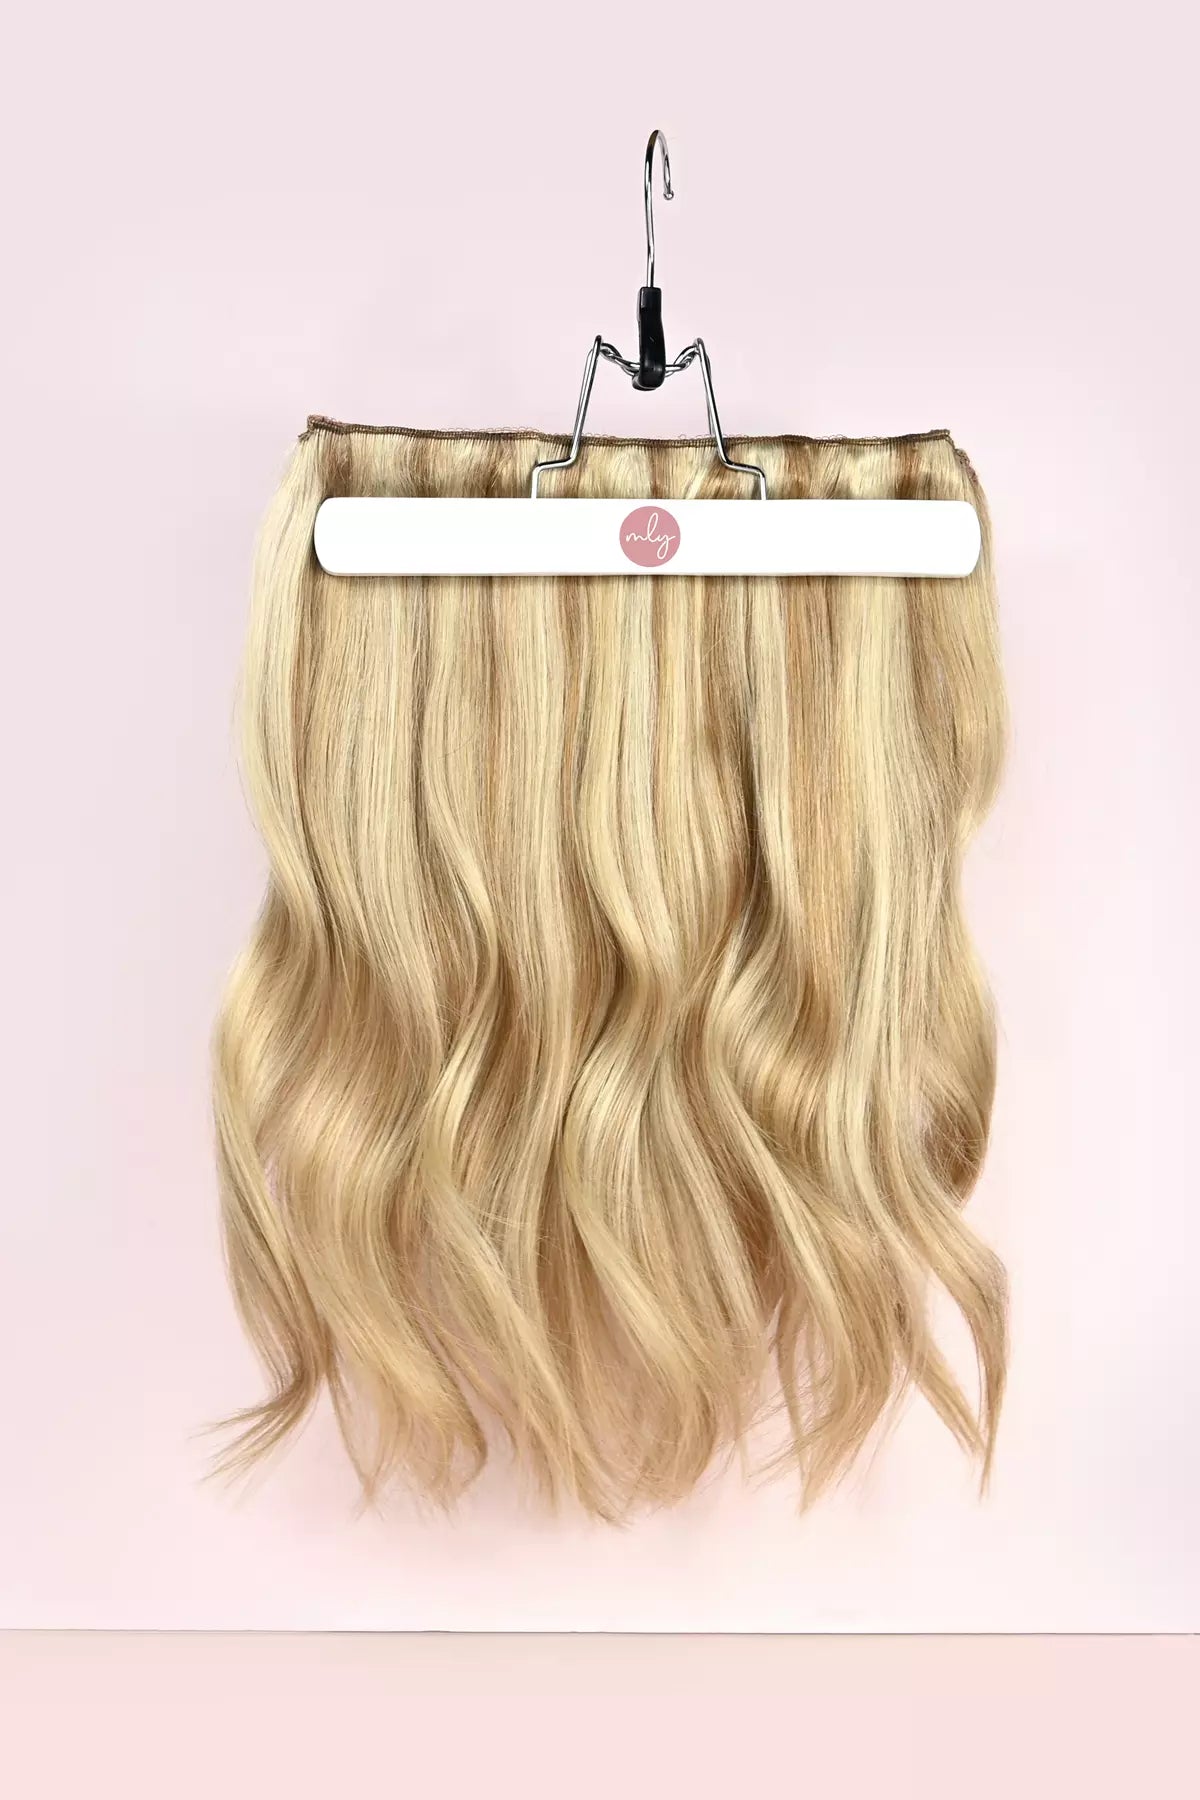 blonde highlights quad weft extensions ☀️ 1 baan clip in hair –